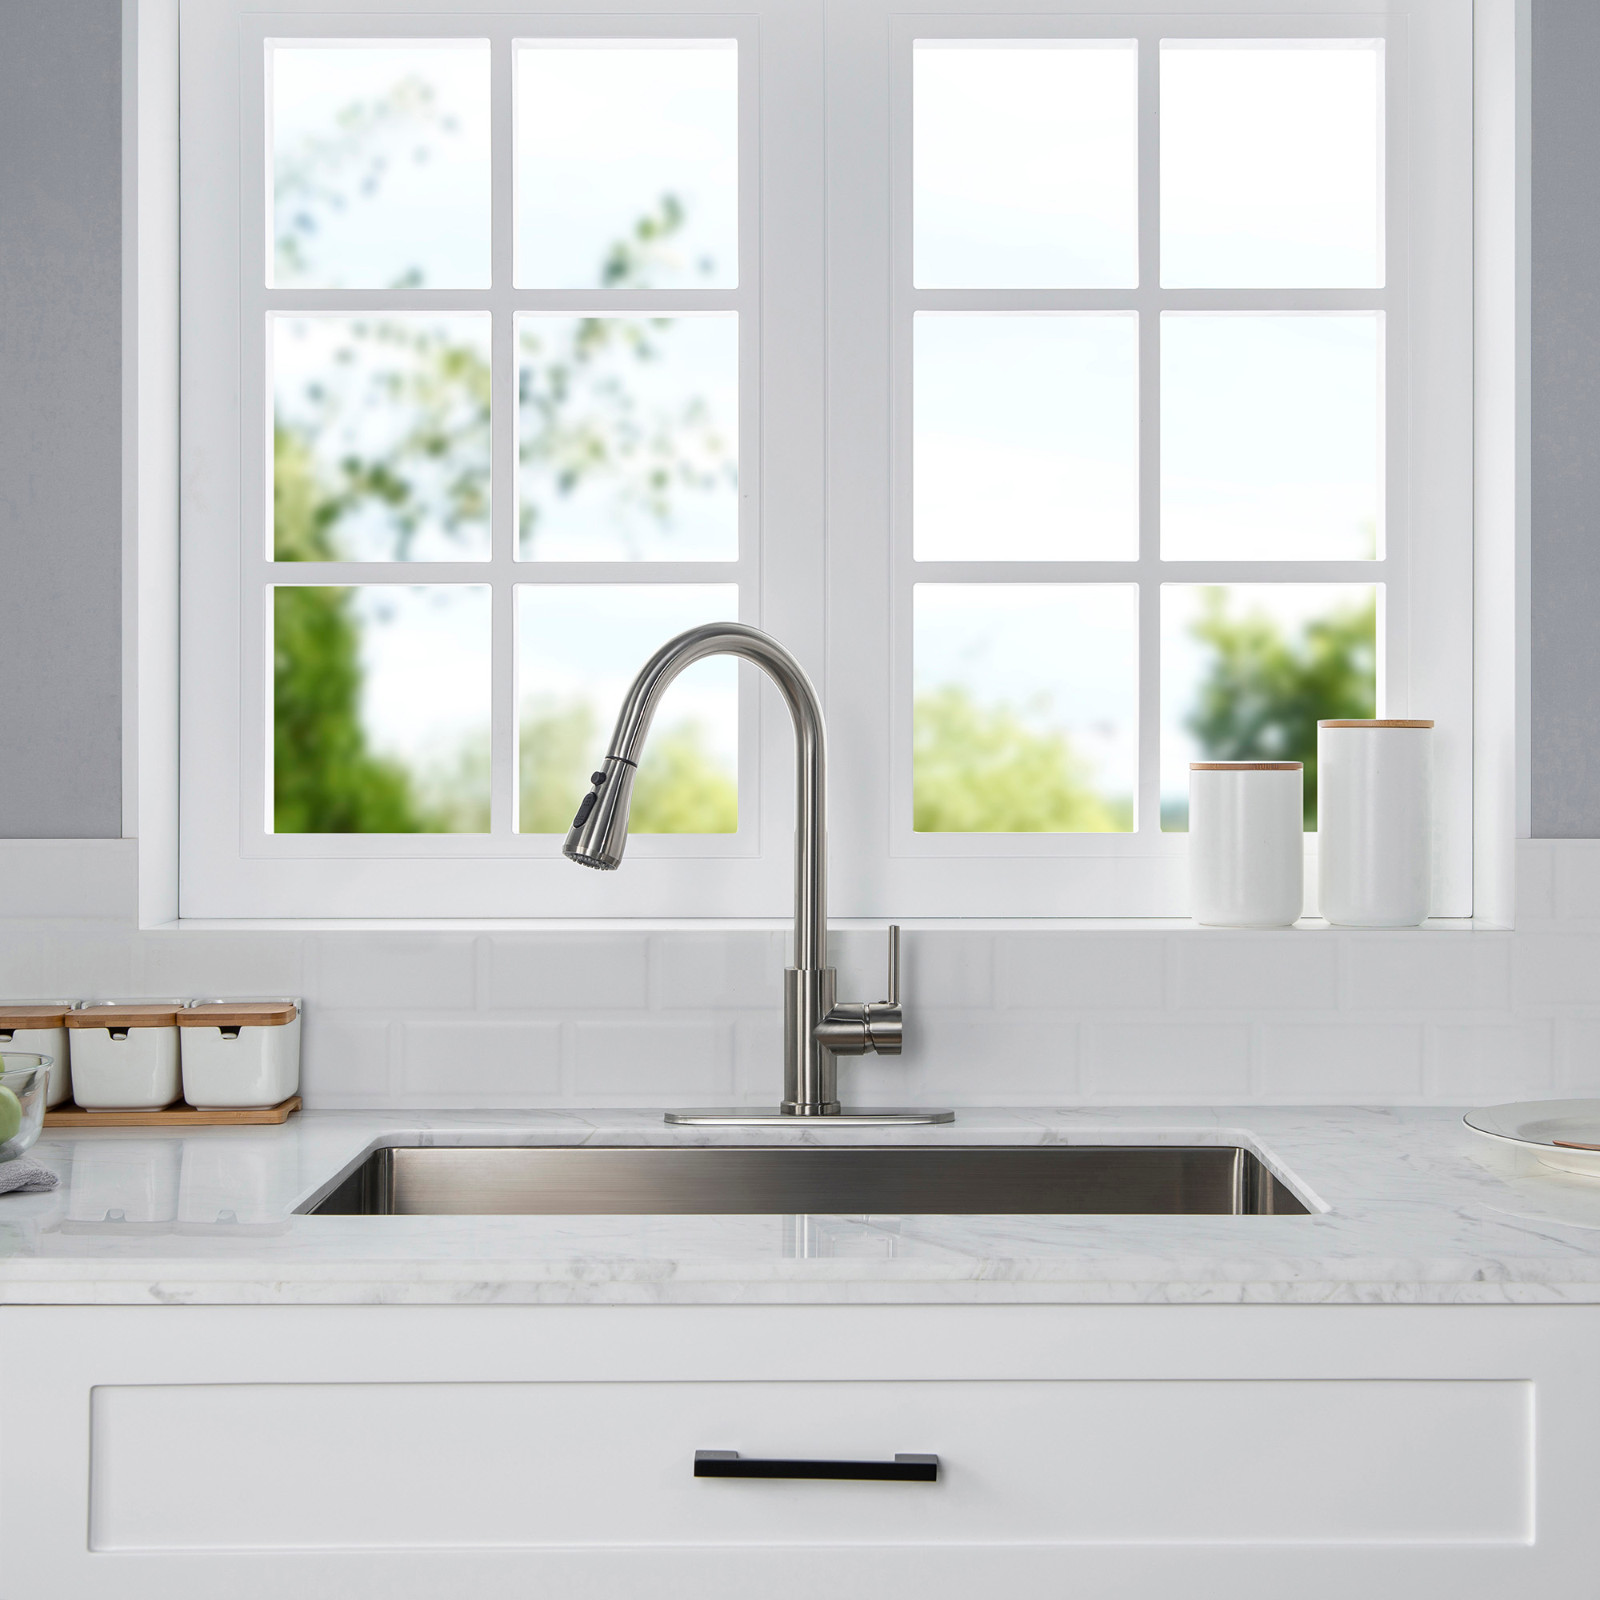  WOODBRIDGE WK090801BN Stainless Steel Single Handle Pull Down Kitchen Faucet in Brushed Nickel Finish._9396